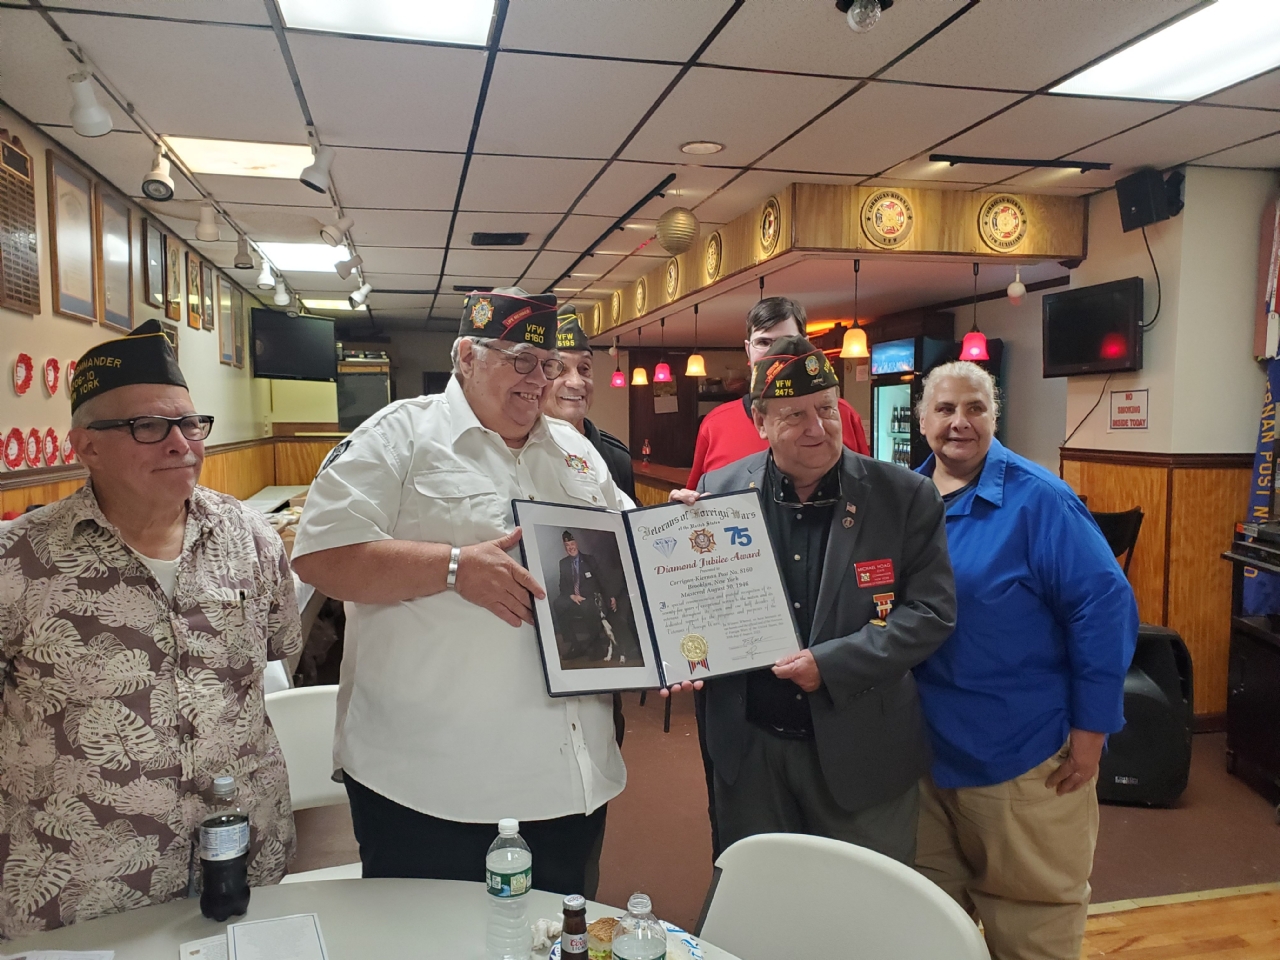 Brooklyn County Commander & Post 8160 Commander Jack Sanford receiving their Diamond Jubilee Award in recognition of their 75 years of service to Veterans and the Community.